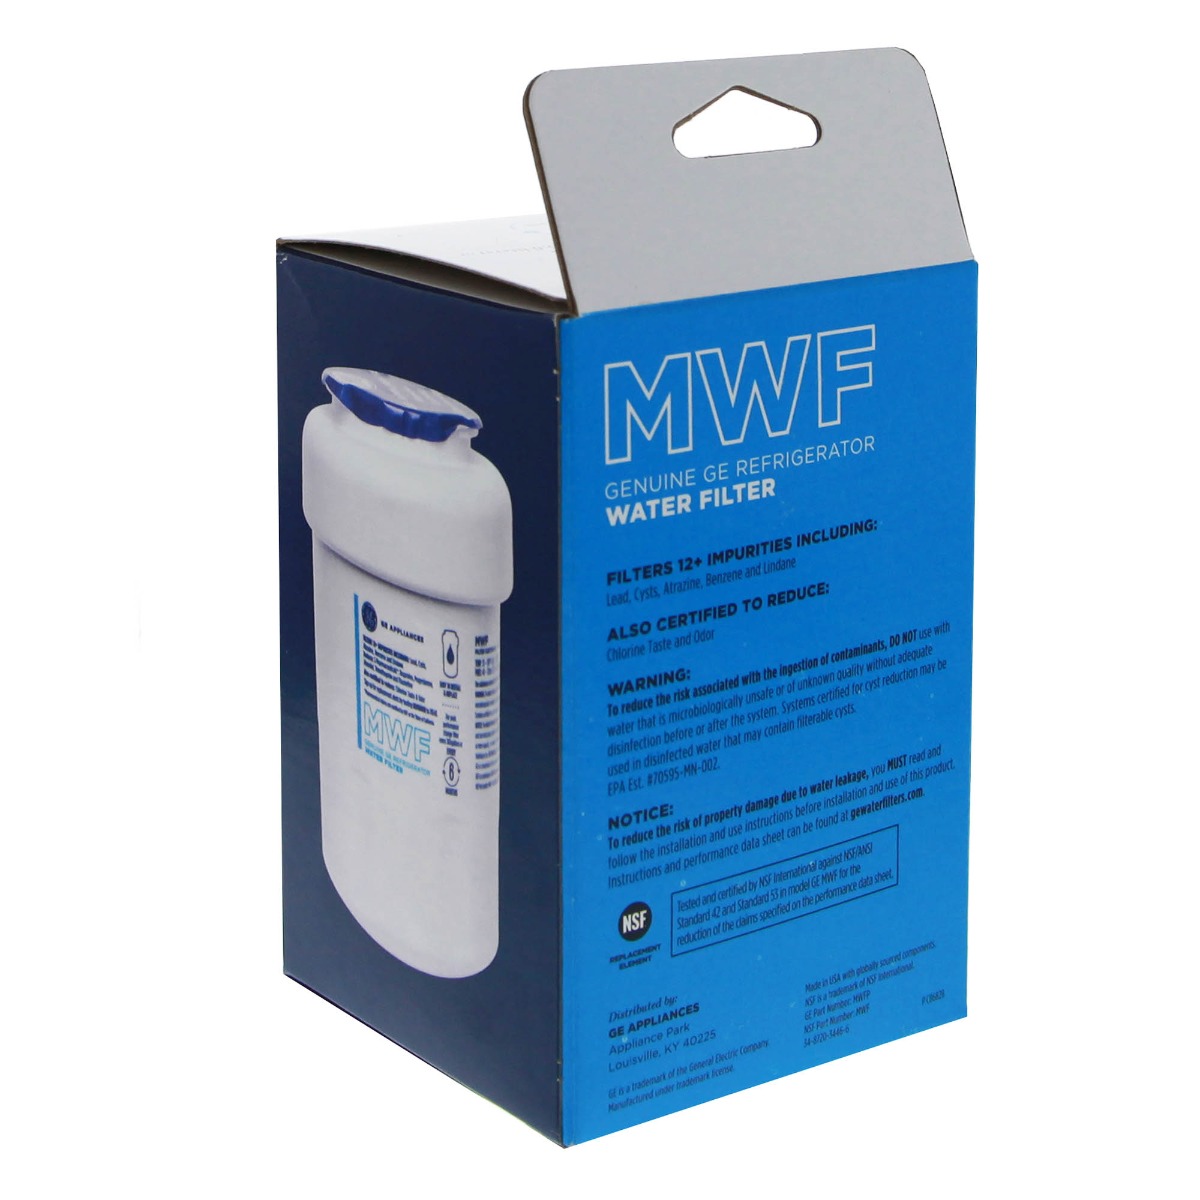 GE SmartWater MWFP Replacement Refrigerator Water Filter - image 2 of 5